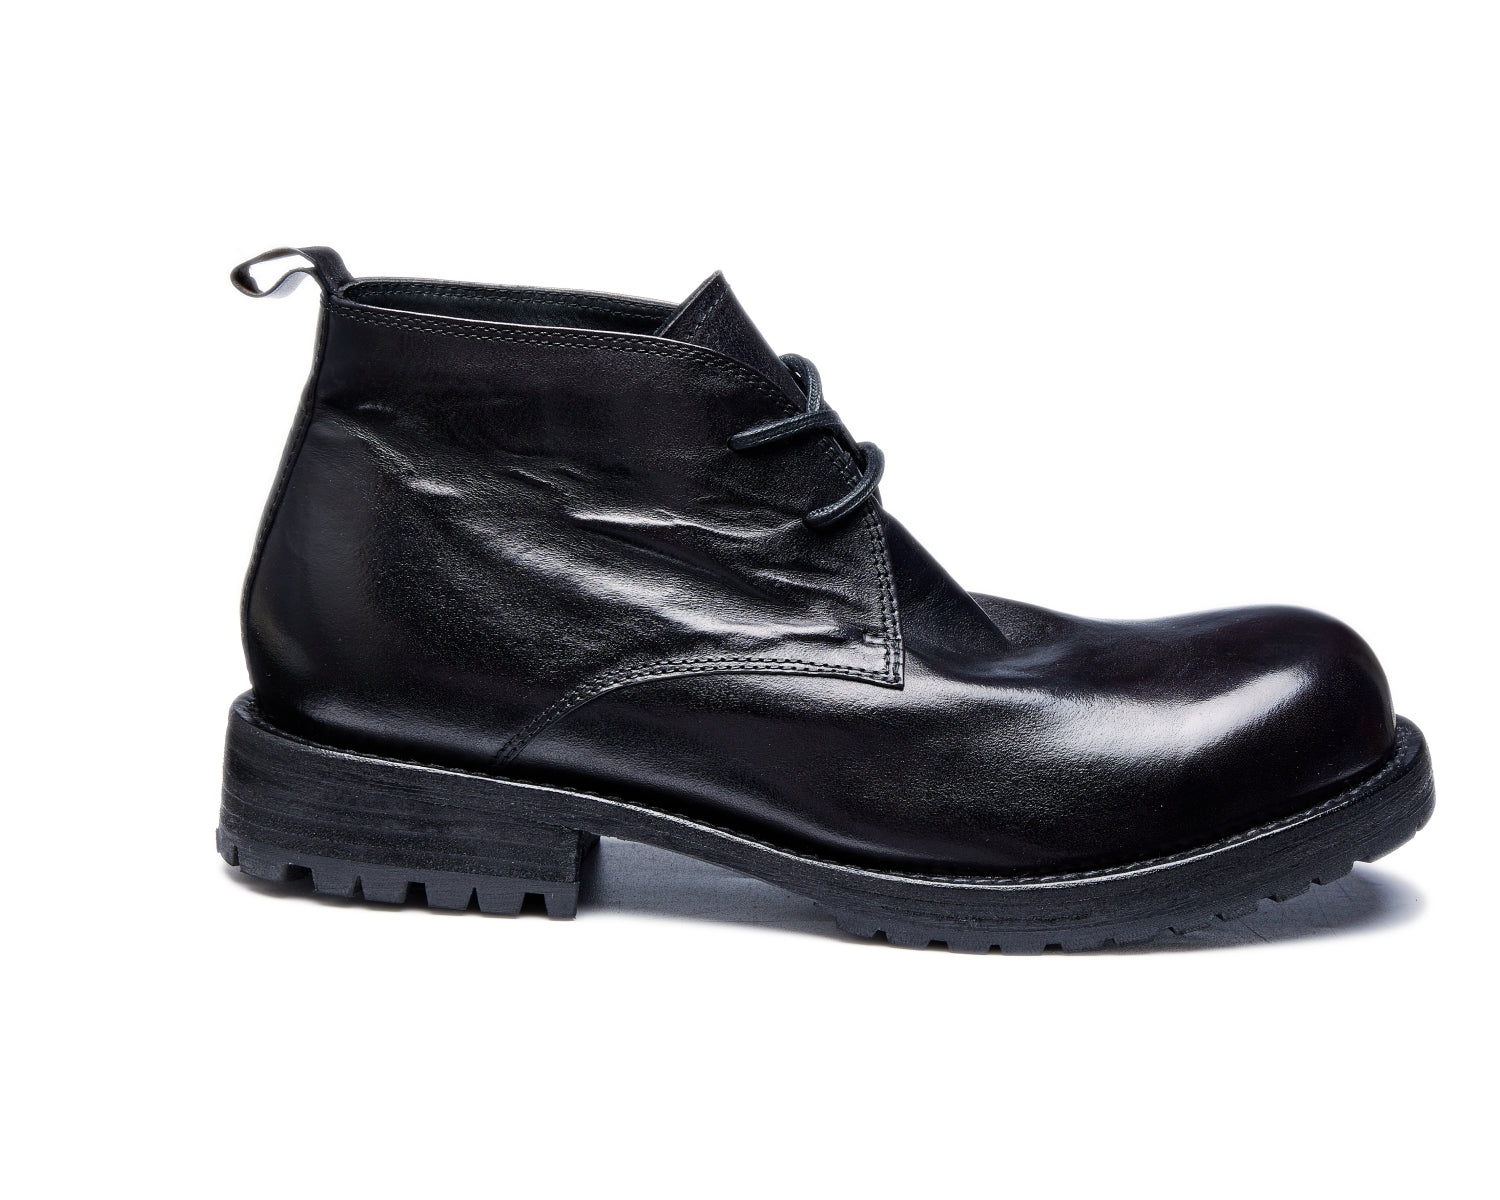 Men's Goodyear welt leather thick-soled Marten boots in various styles including manner, old, and skin designs black 